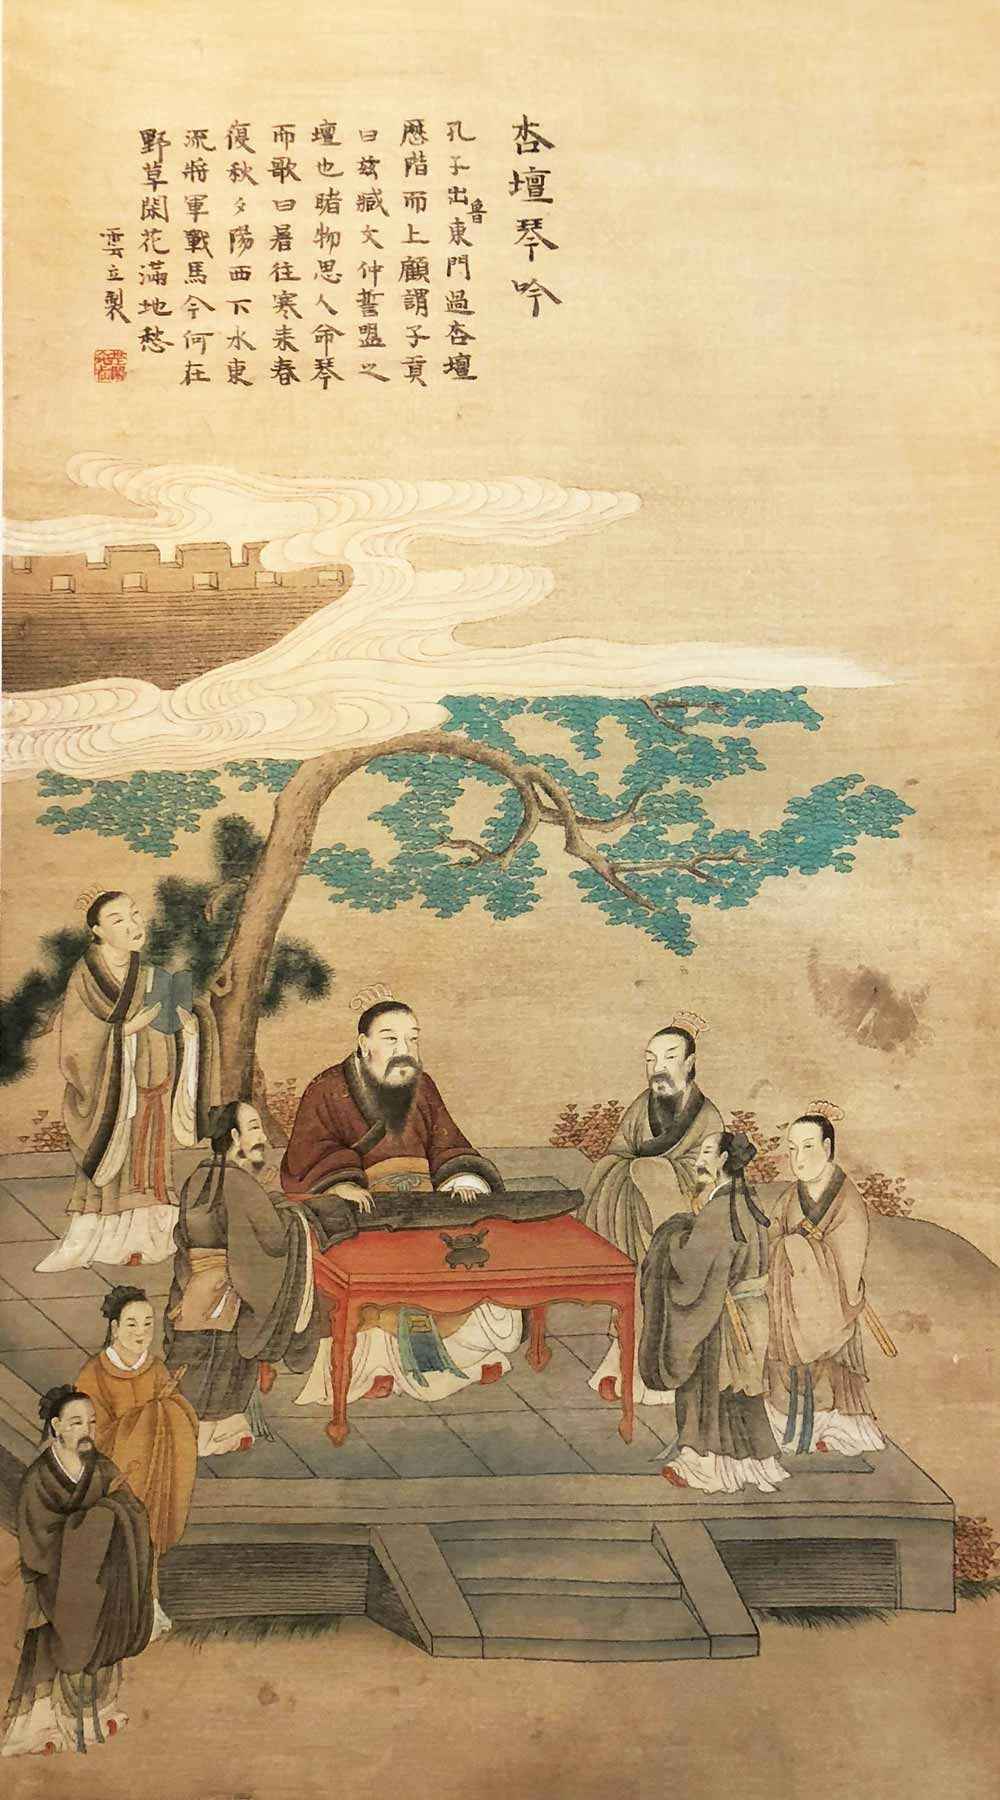 Confucius and the qin